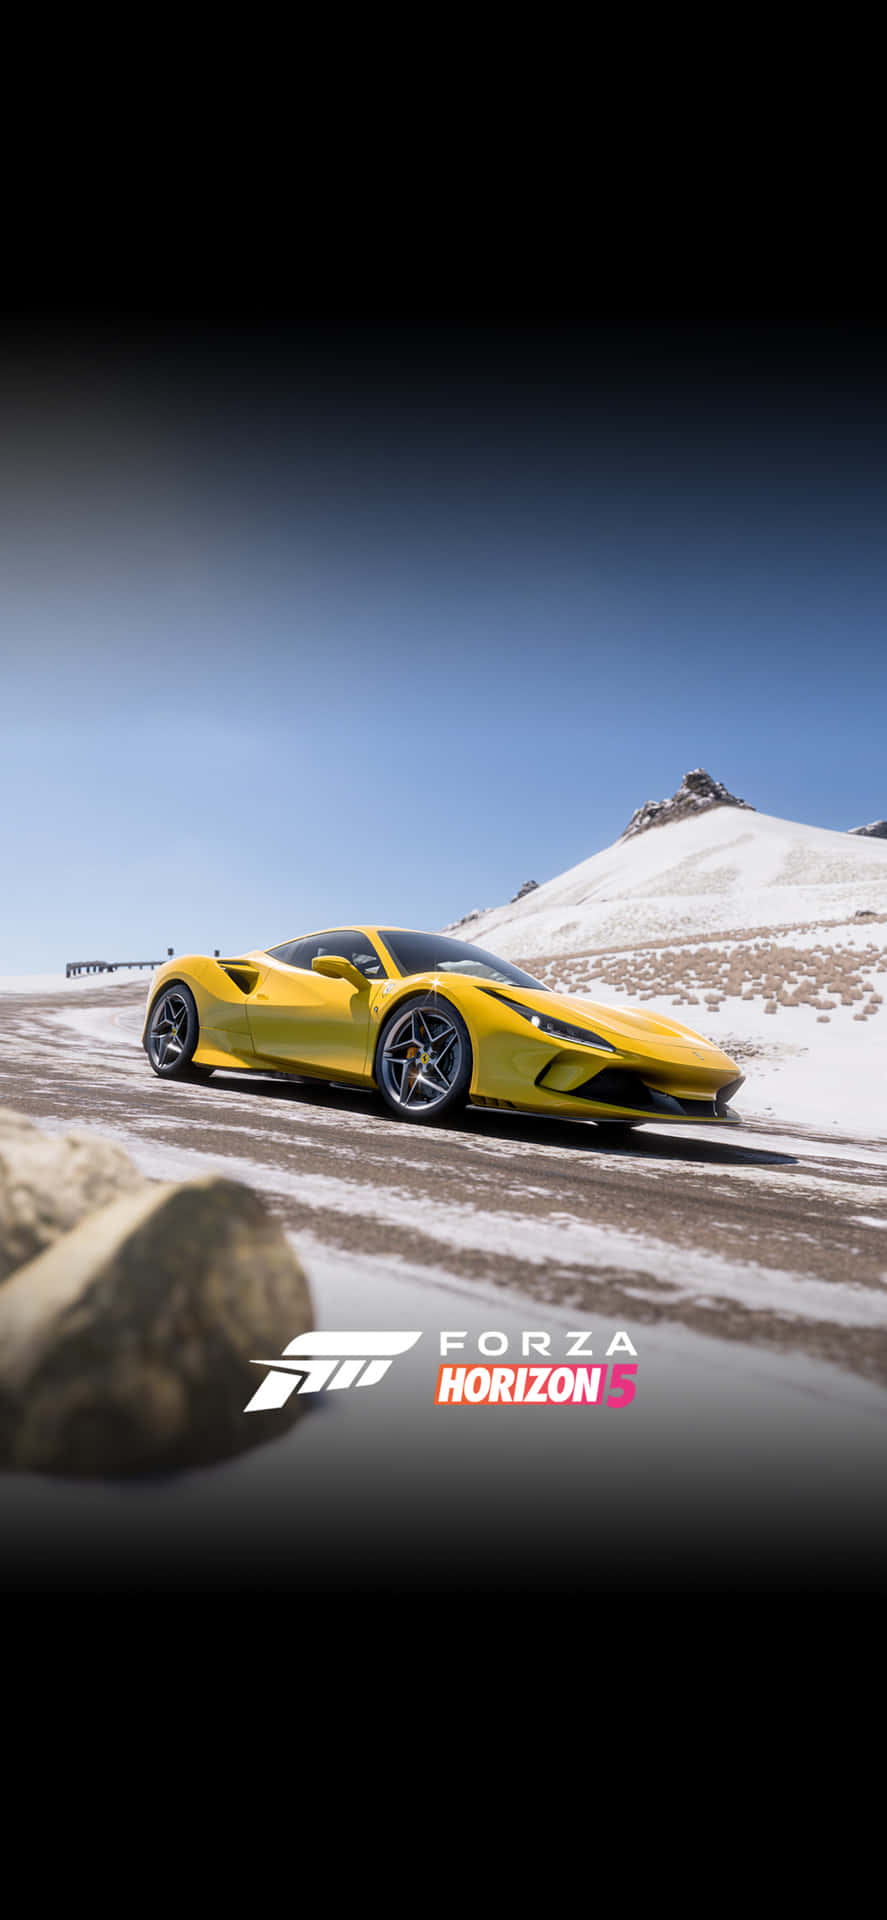 A Yellow Car Driving On A Snowy Mountain